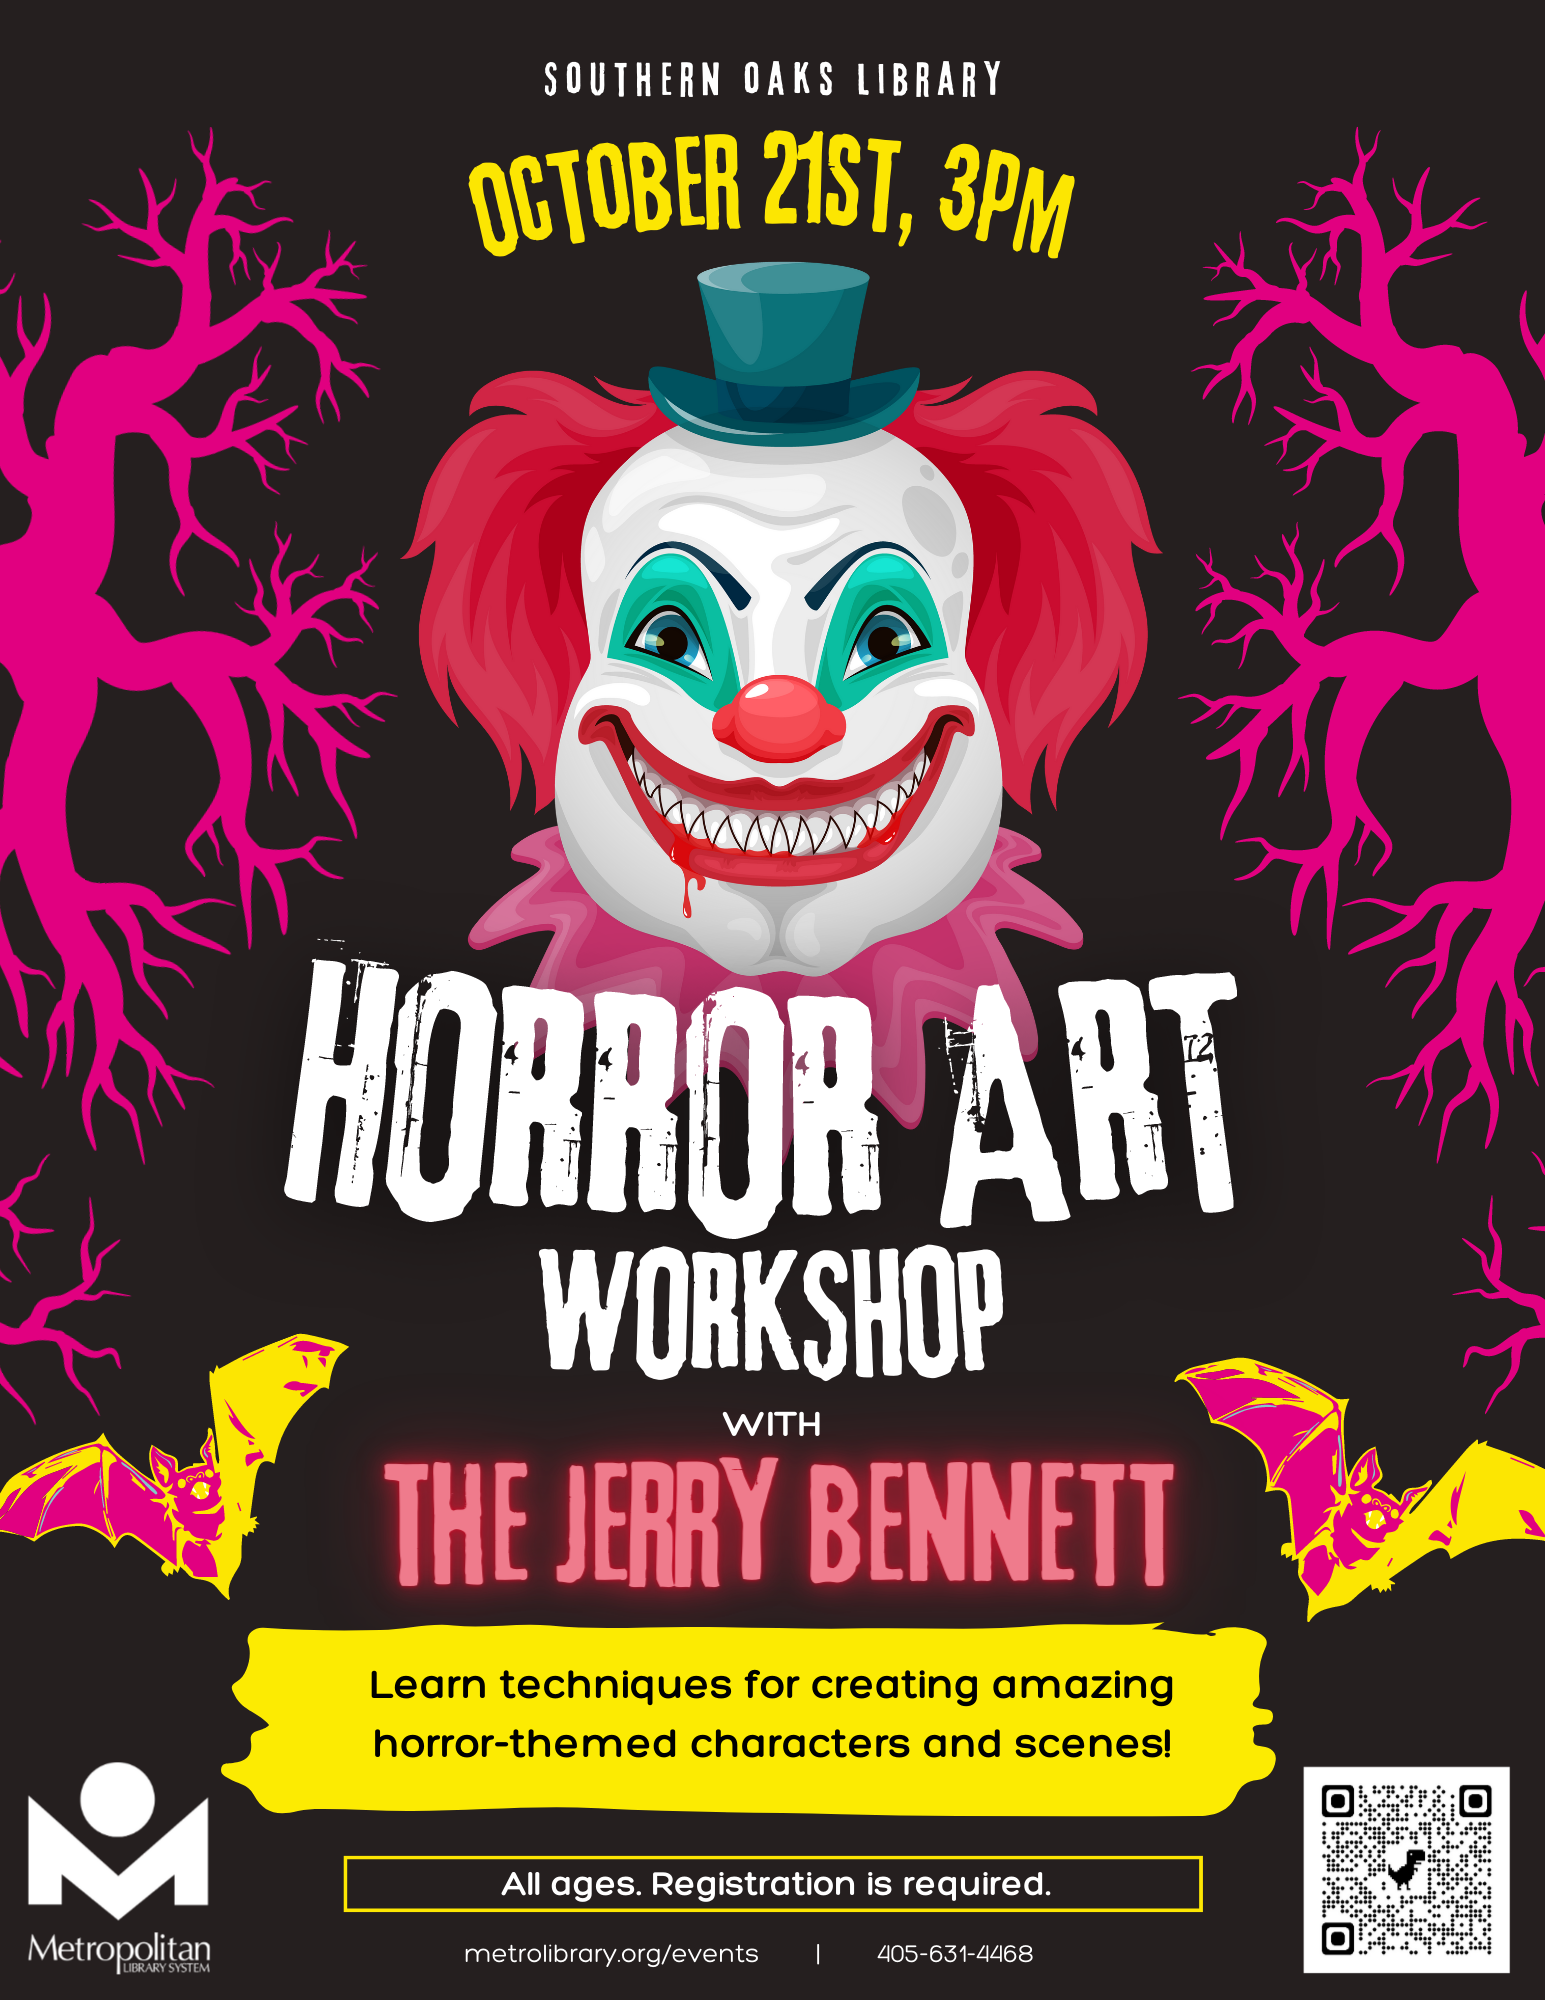 A flyer for the program with a creepy clown